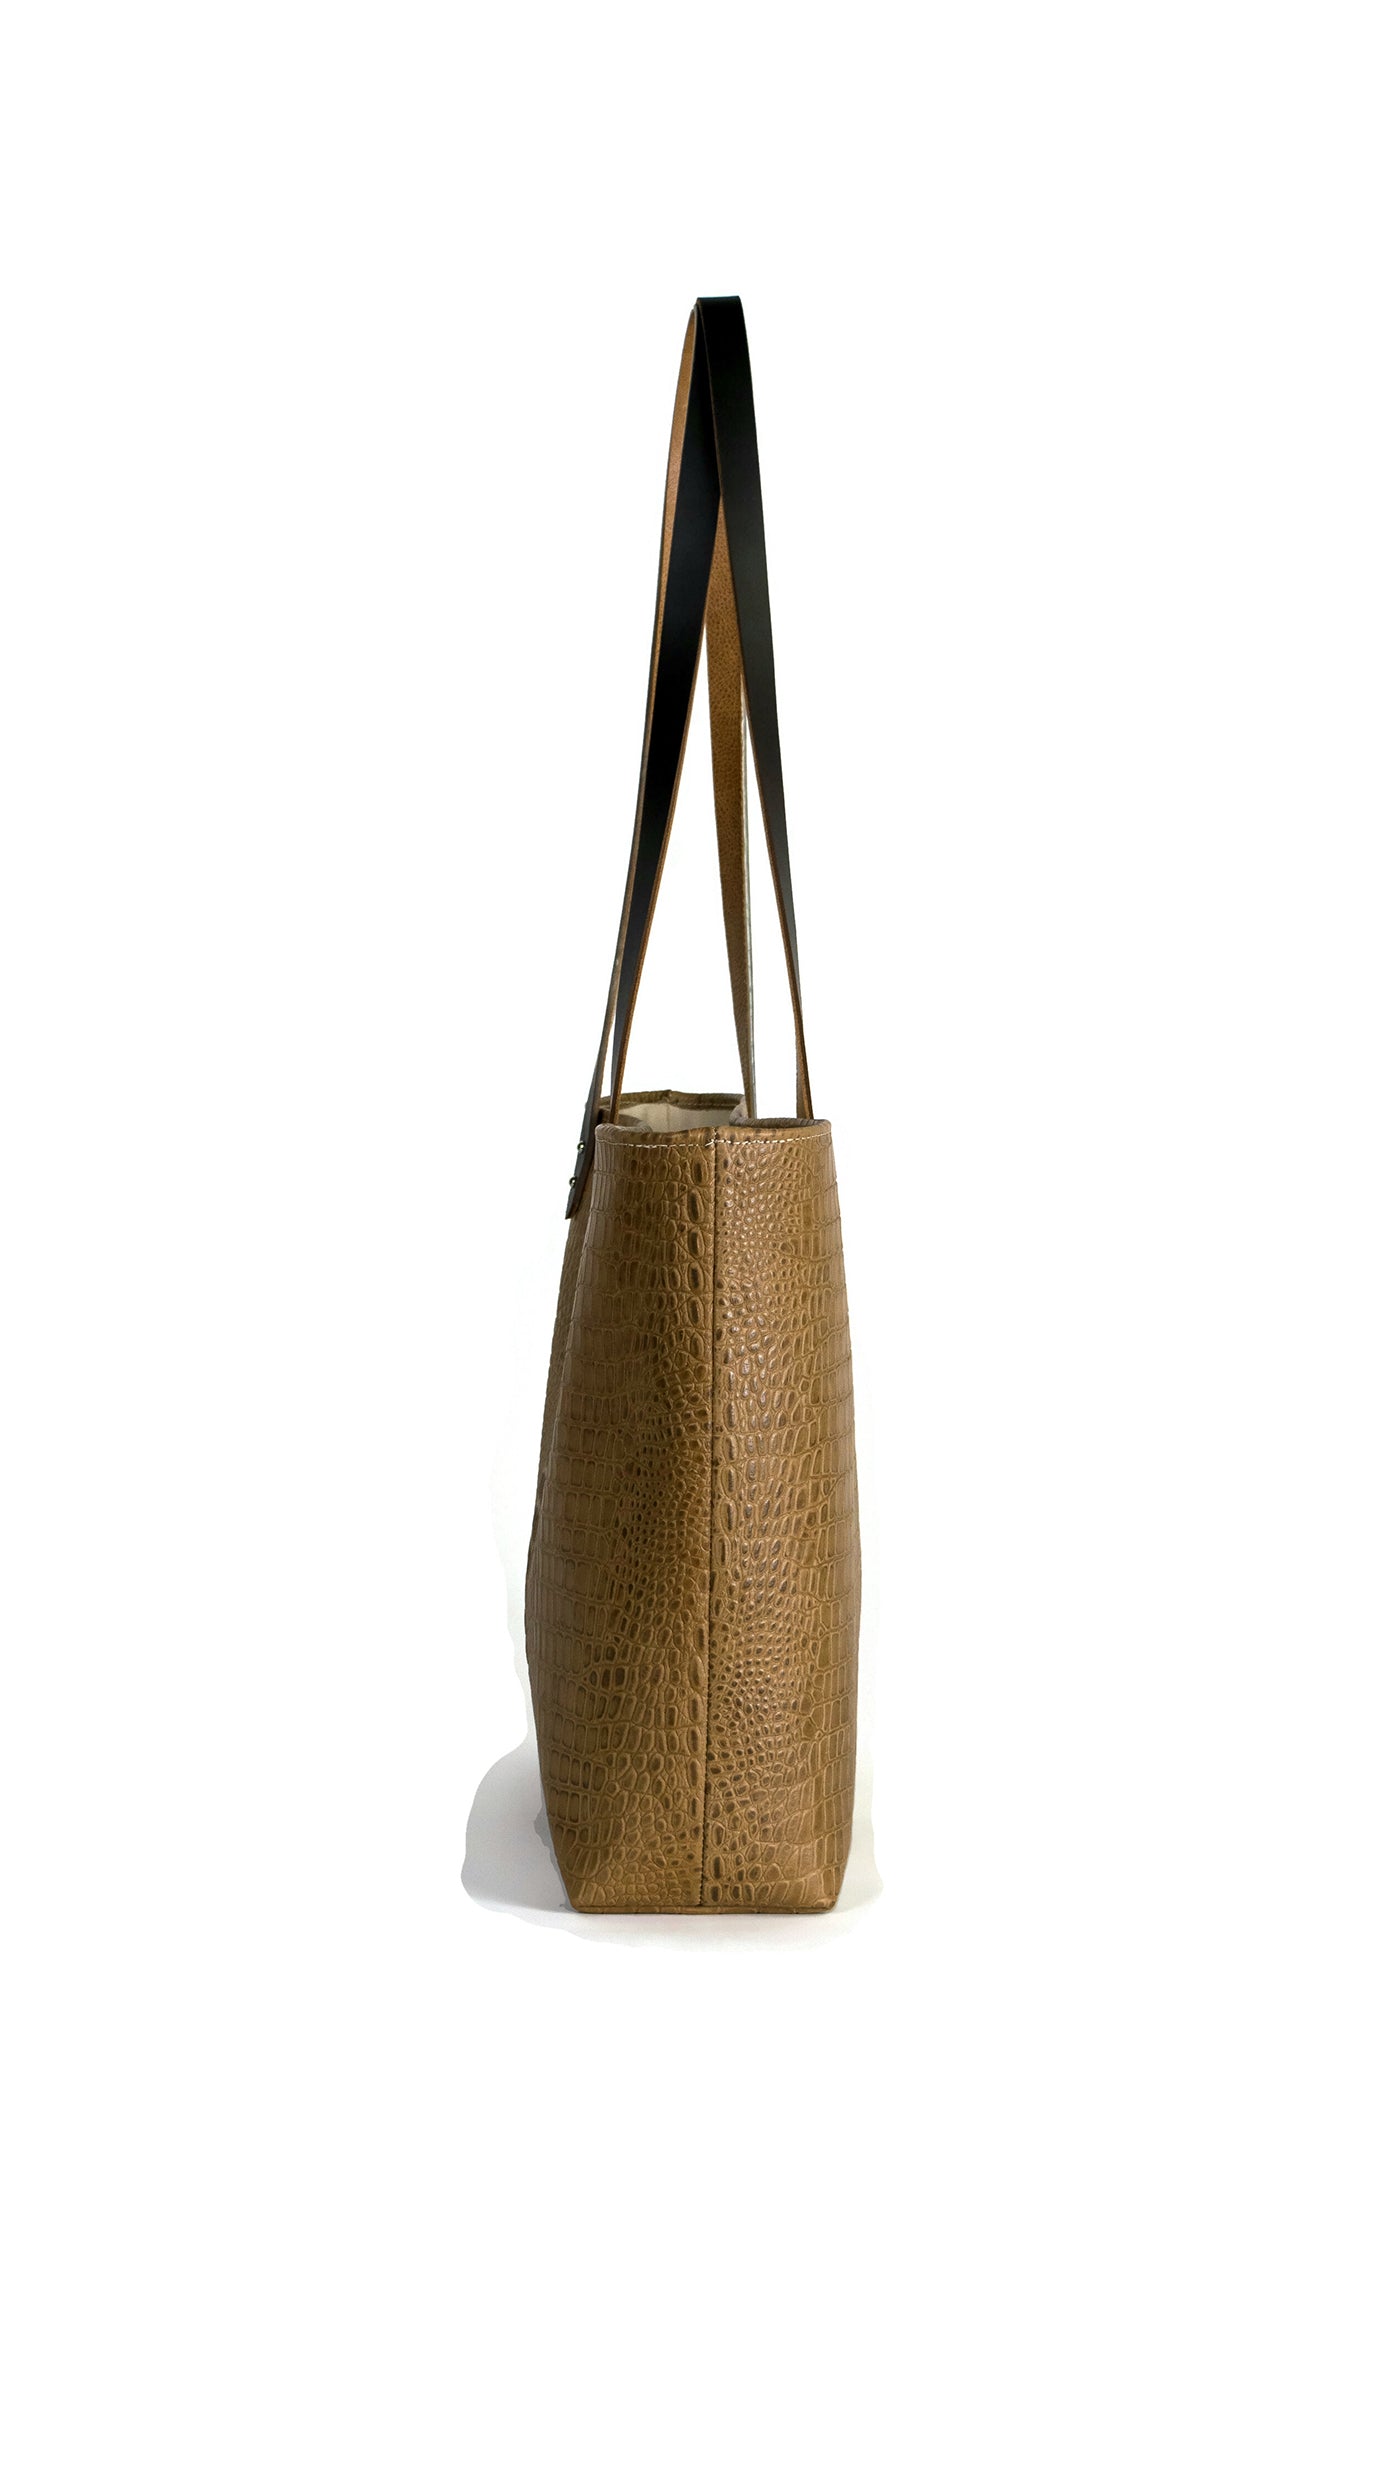 M St. Tote Bag in Brown and Mocha Caiman Croc Embossed Leather